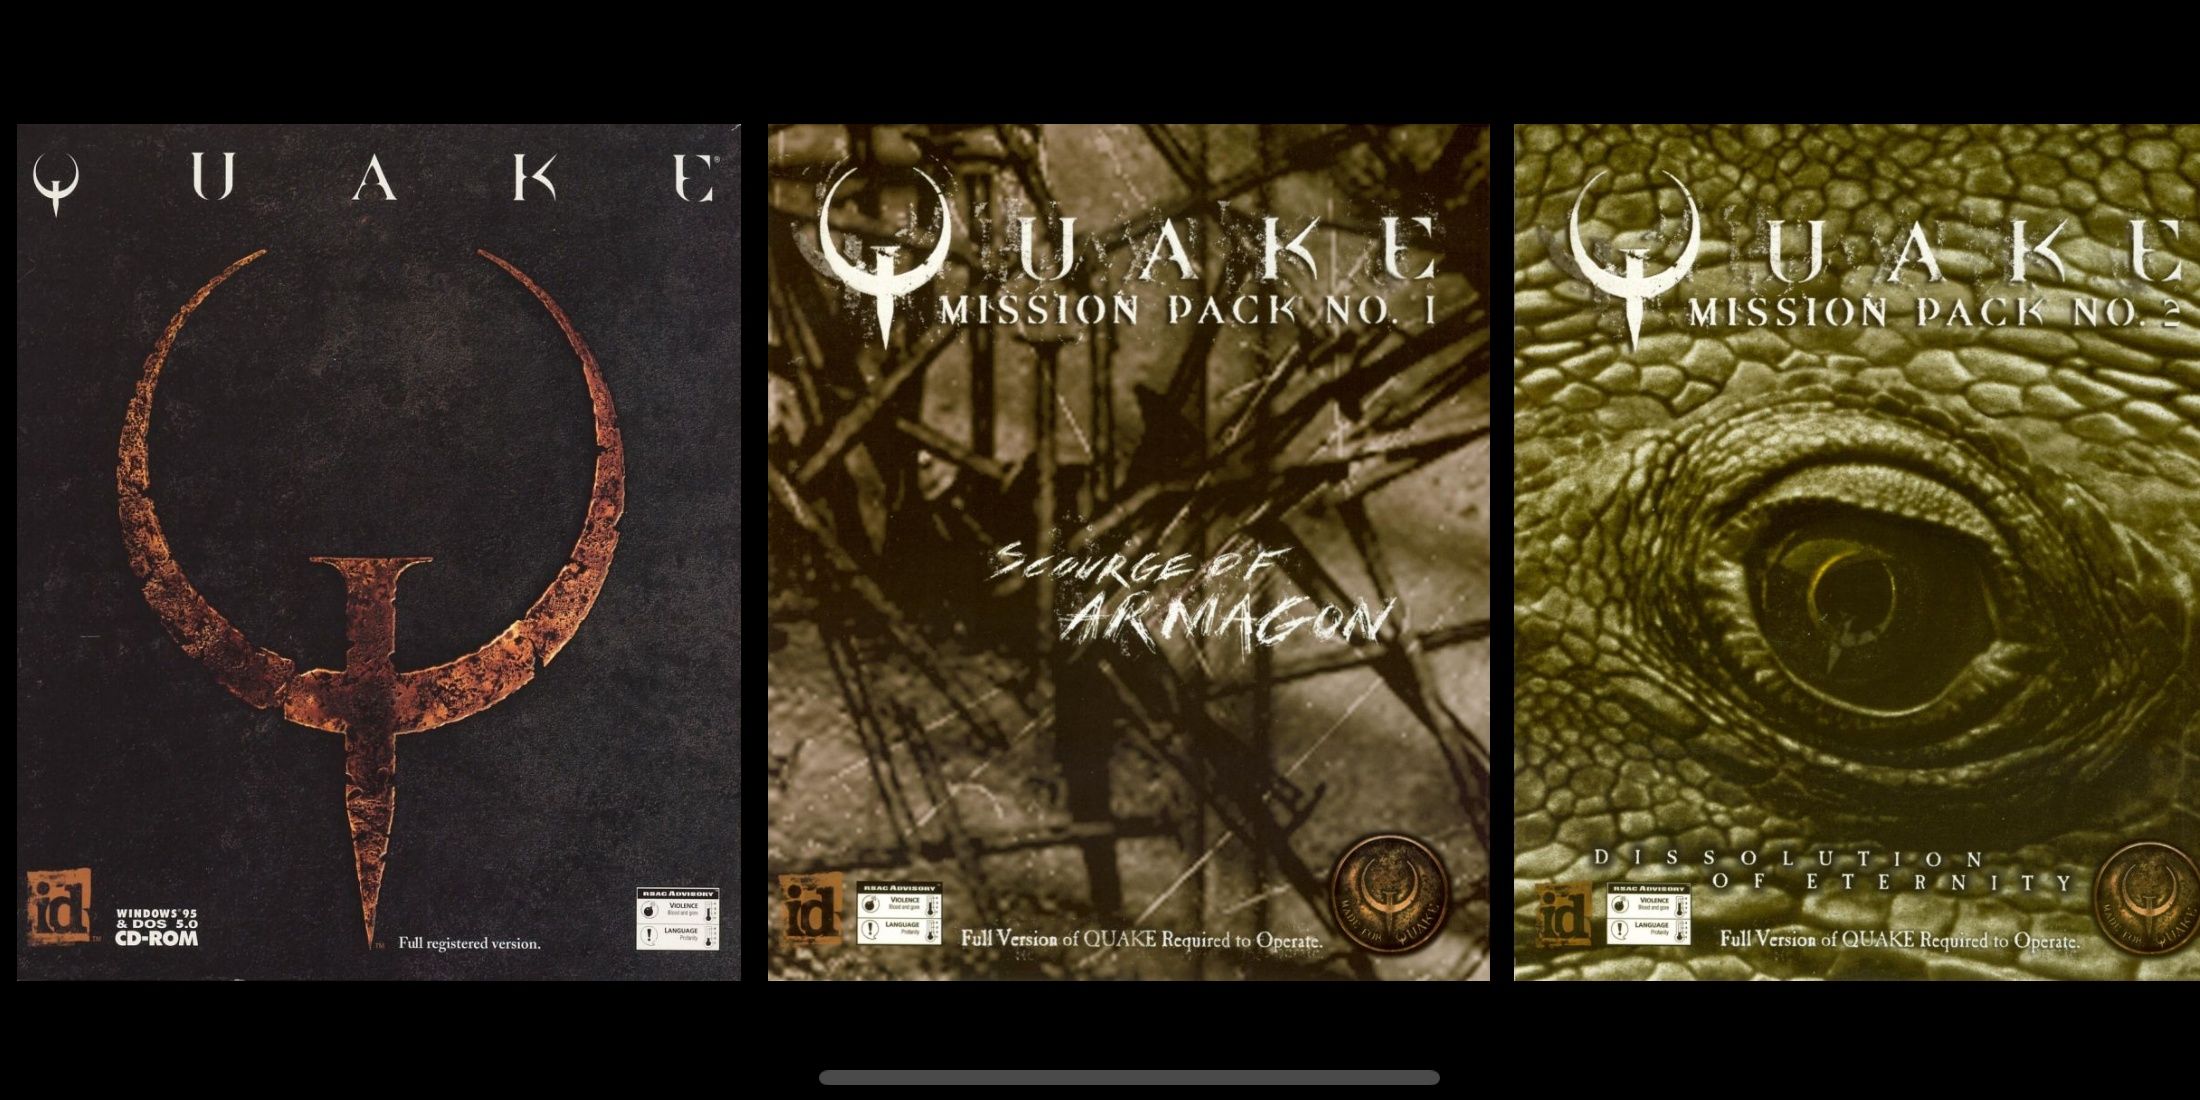 Quake and mission packs cover art